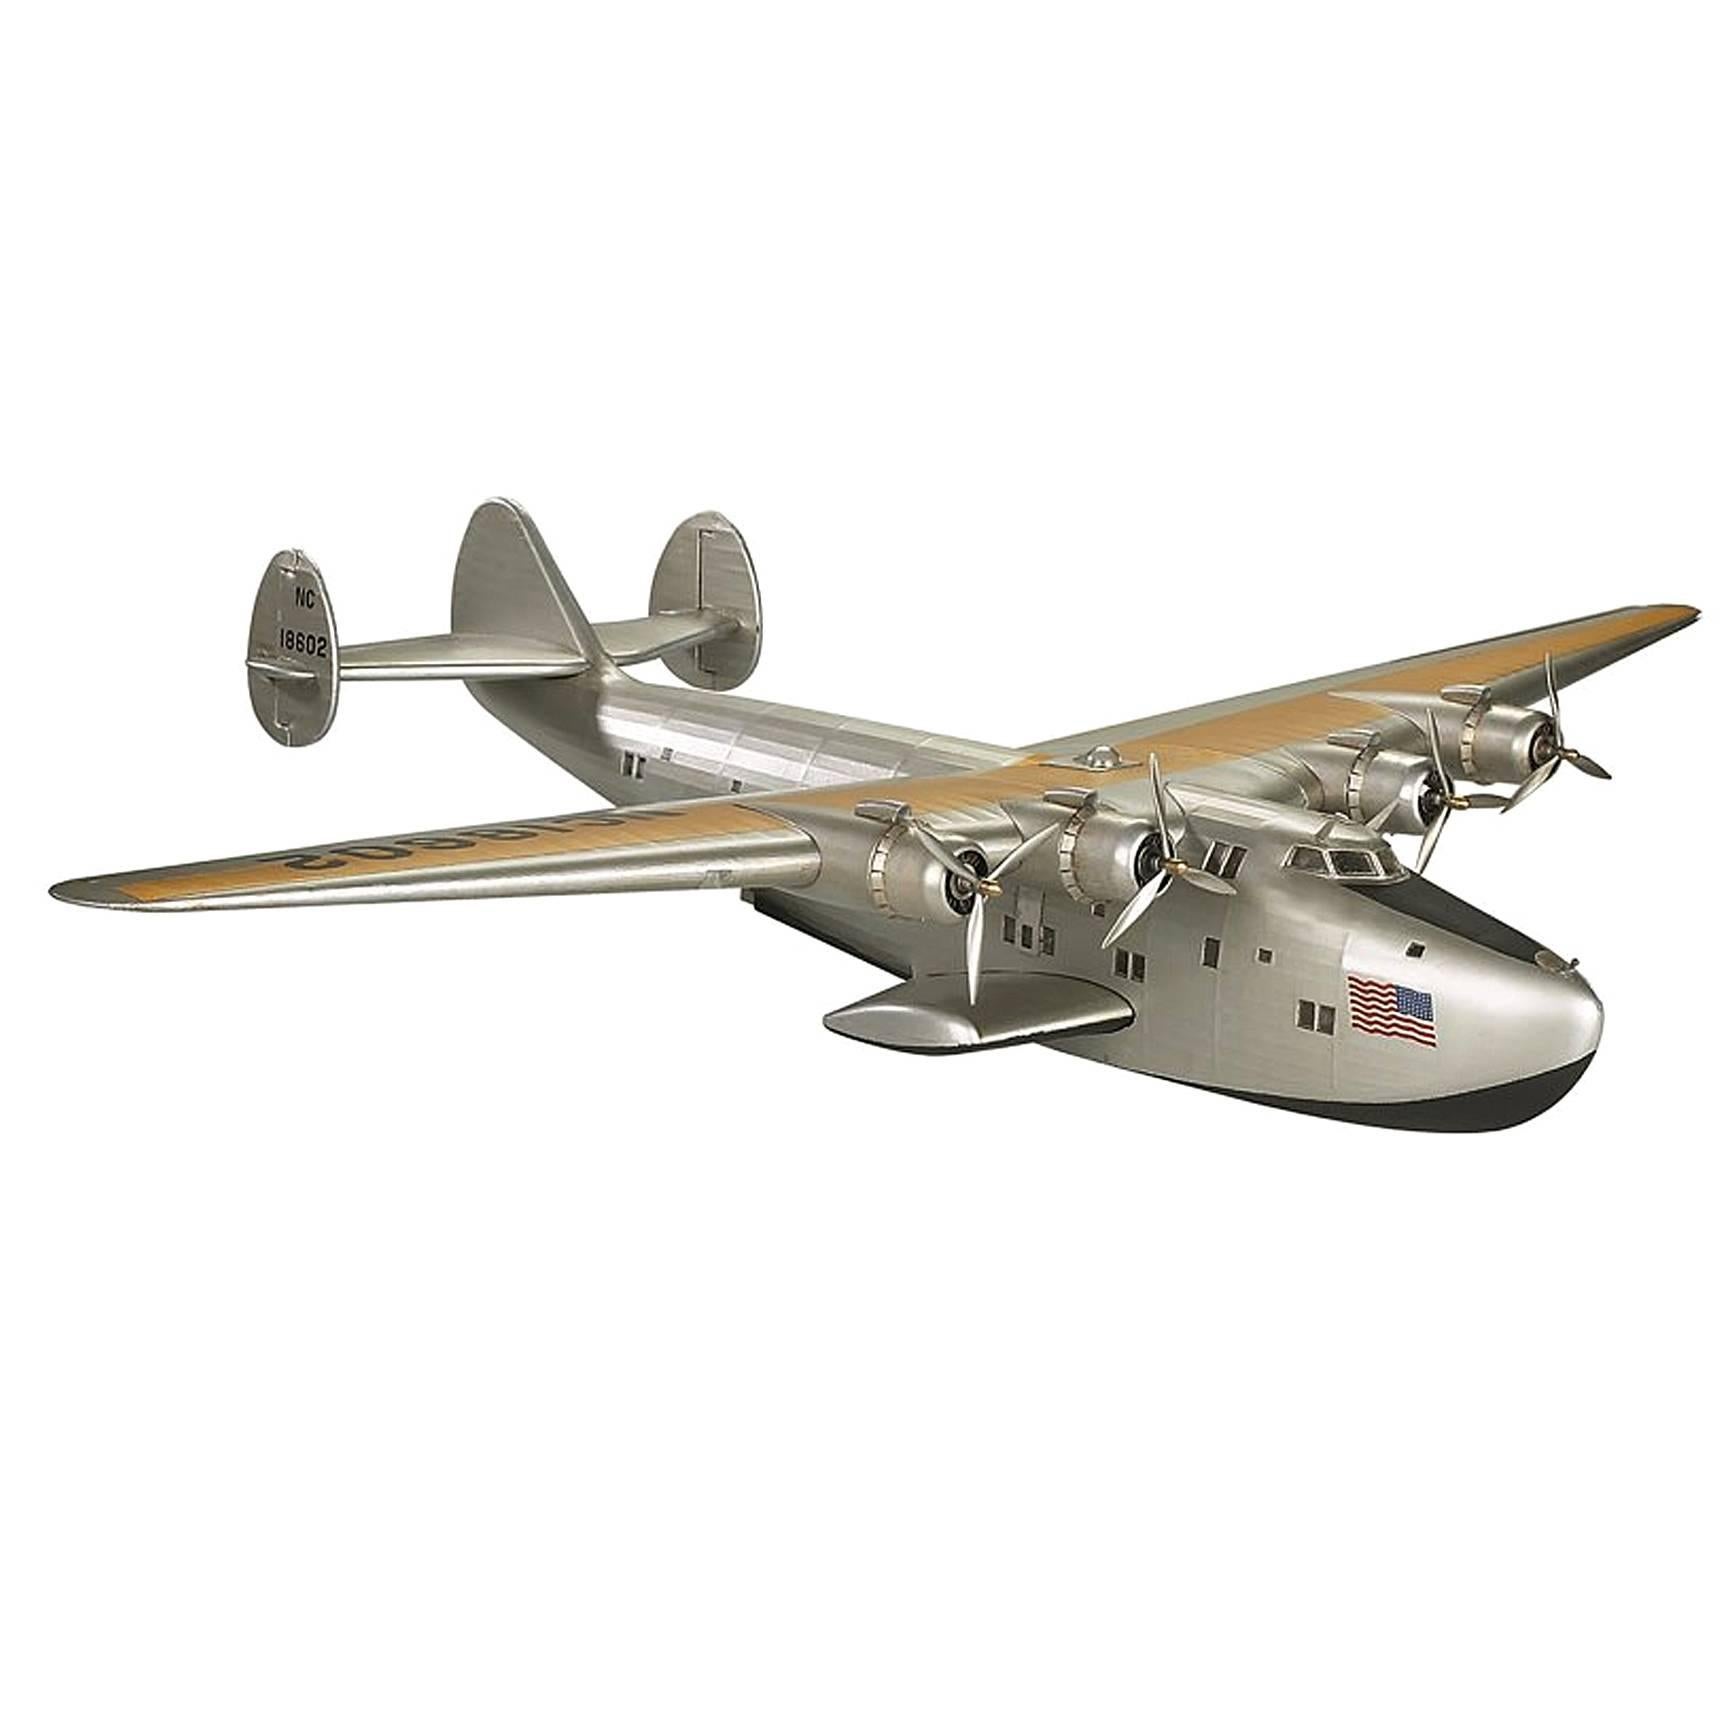 First Boeing 314 Dixie Clipper Aircraft from PanAm Airways Reduced Model